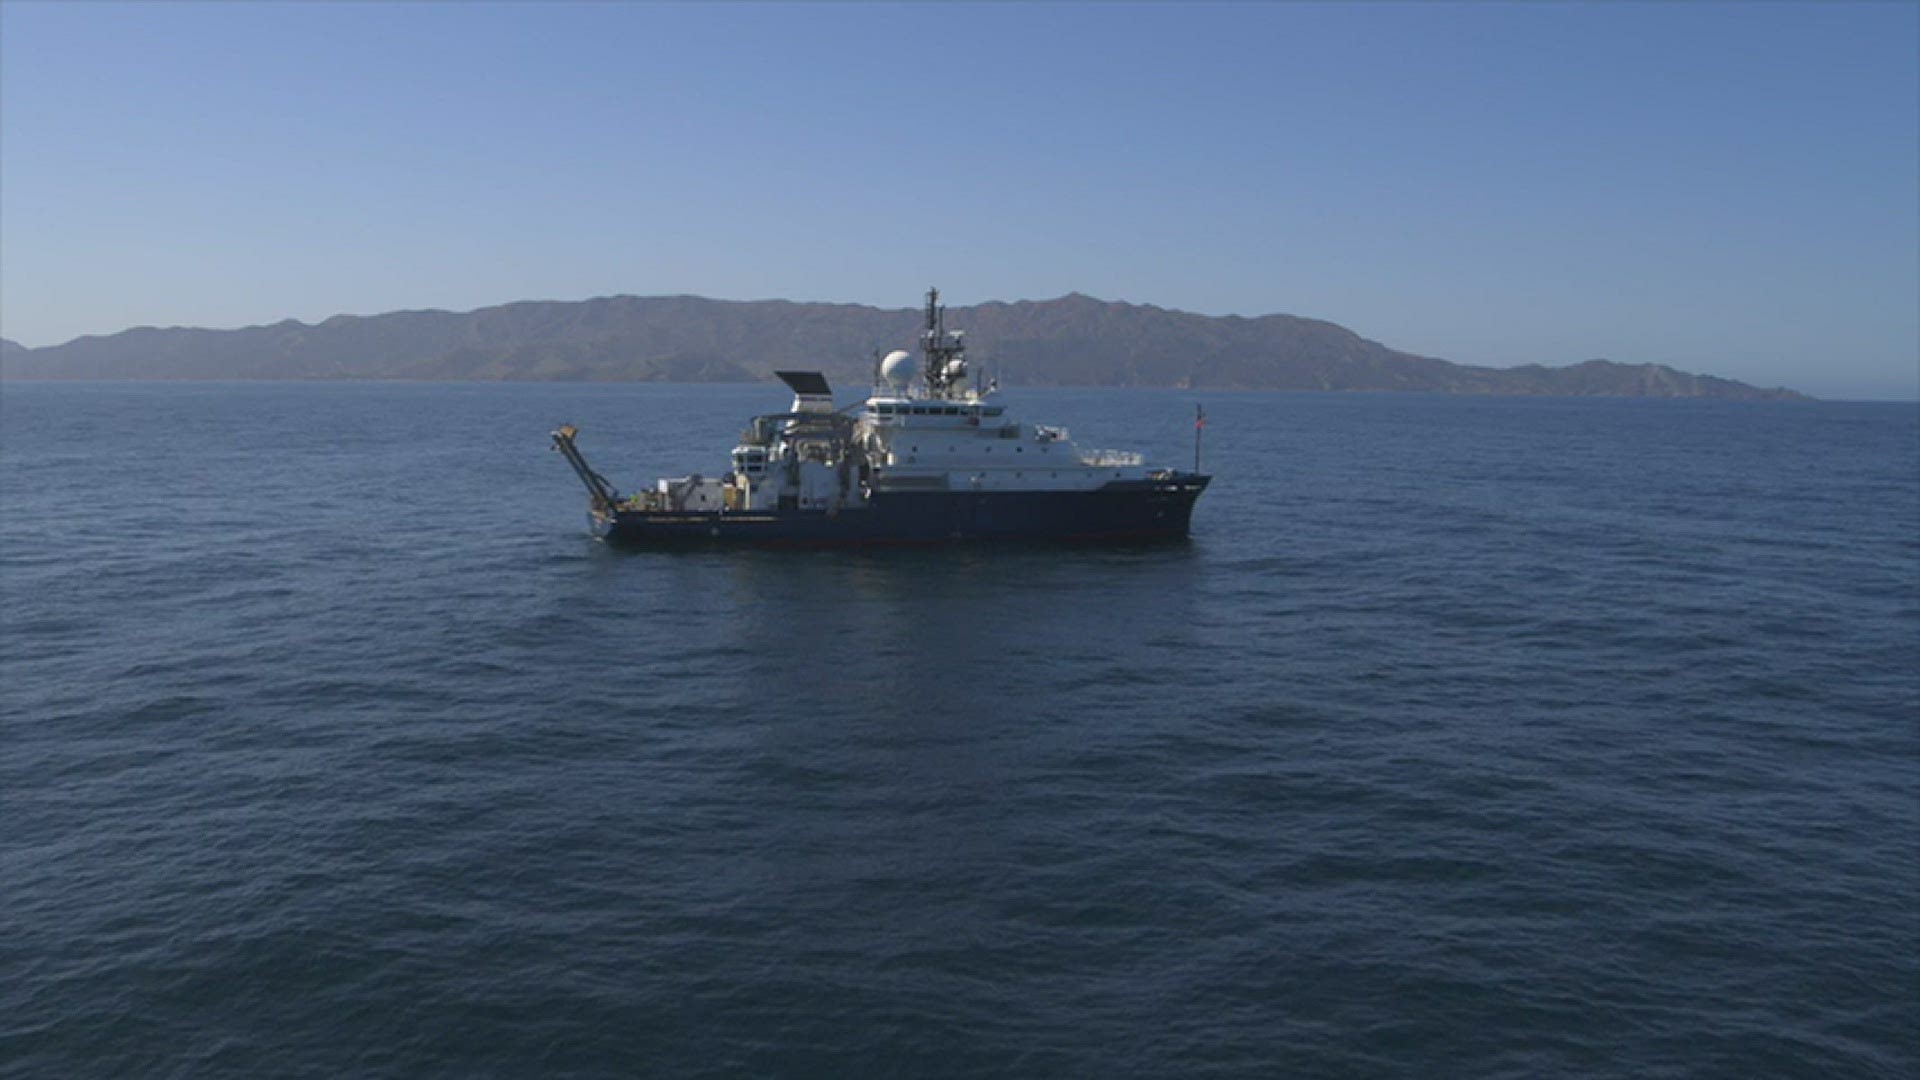 Scientists from Scripps Institution of Oceanography at UC San Diego conduct a seafloor survey between Catalina Island and LA coast on Research Vessel Sally Ride.